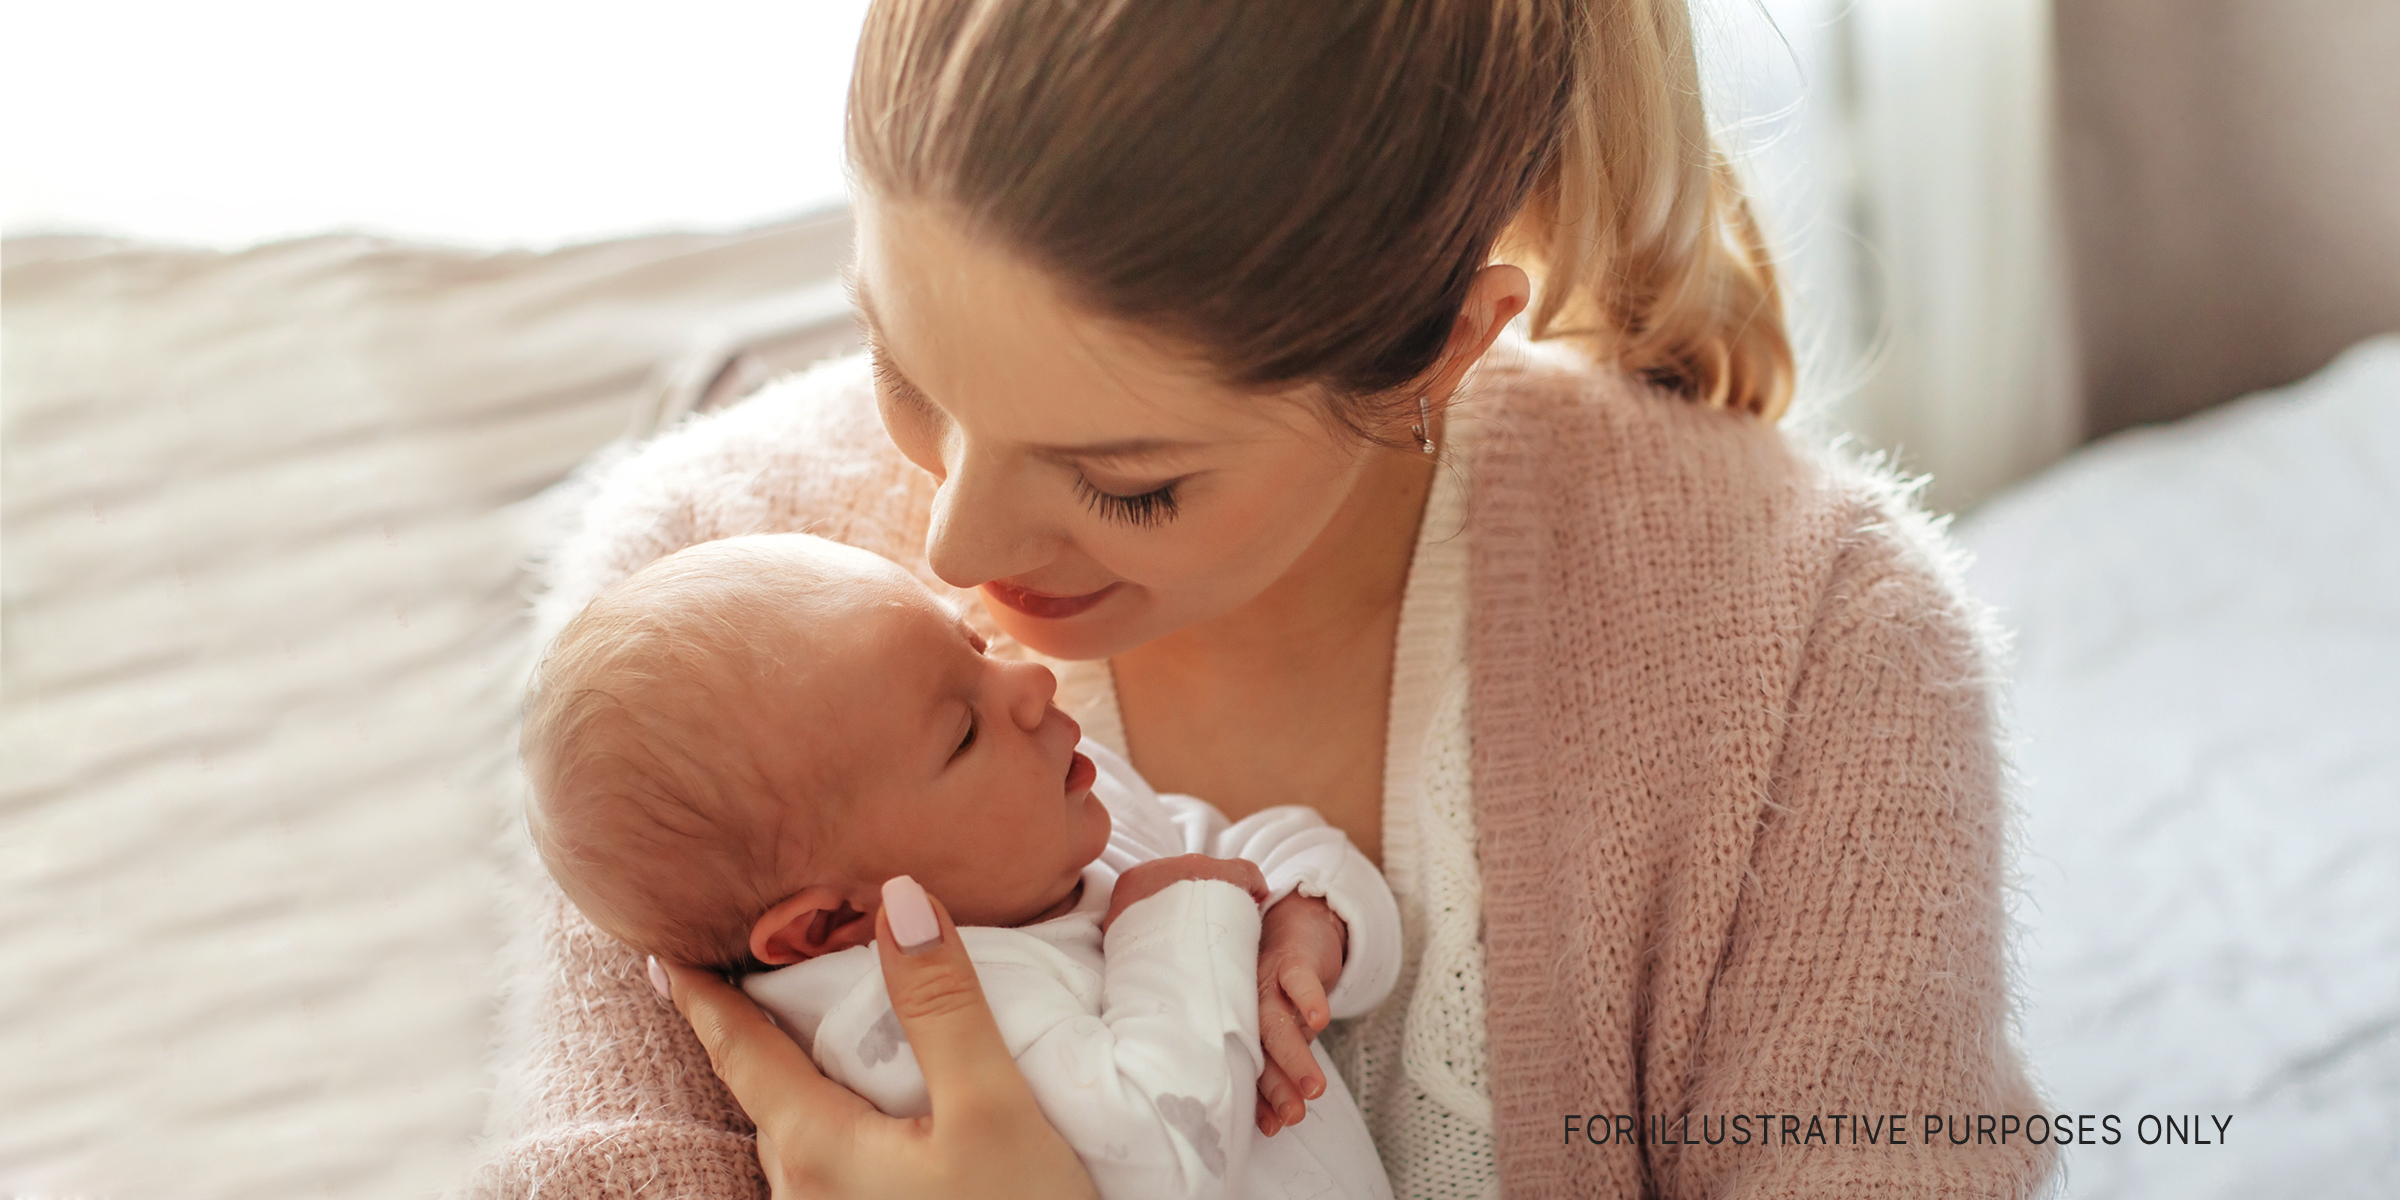 A woman and baby | Source: Shutterstock